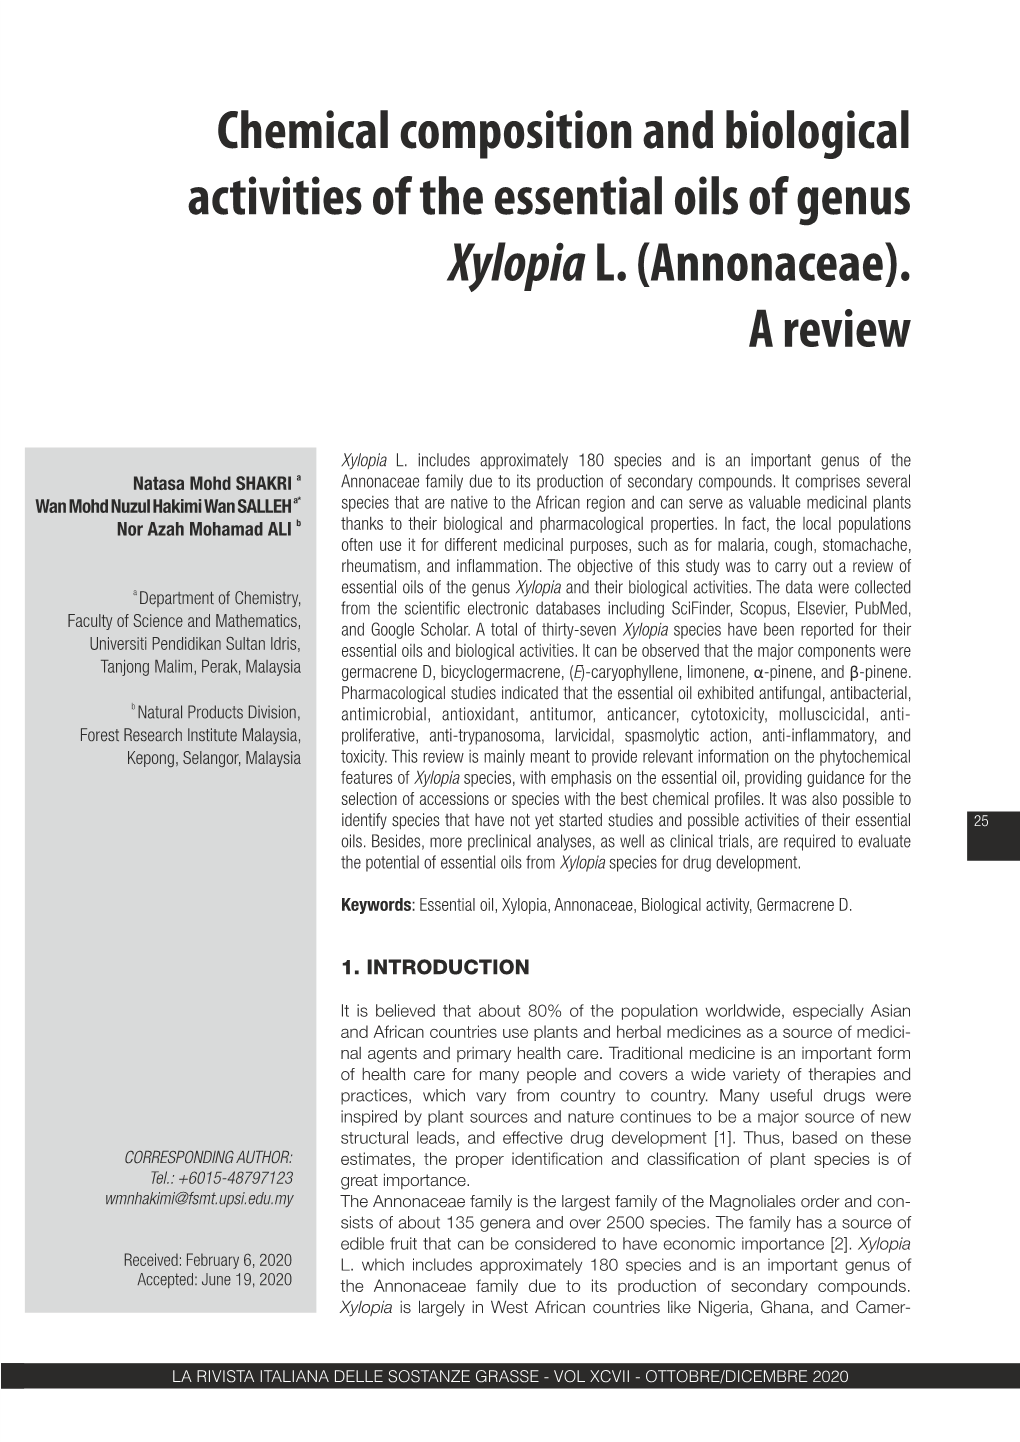 Chemical Composition and Biological Activities of the Essential Oils of Genus Xylopia L